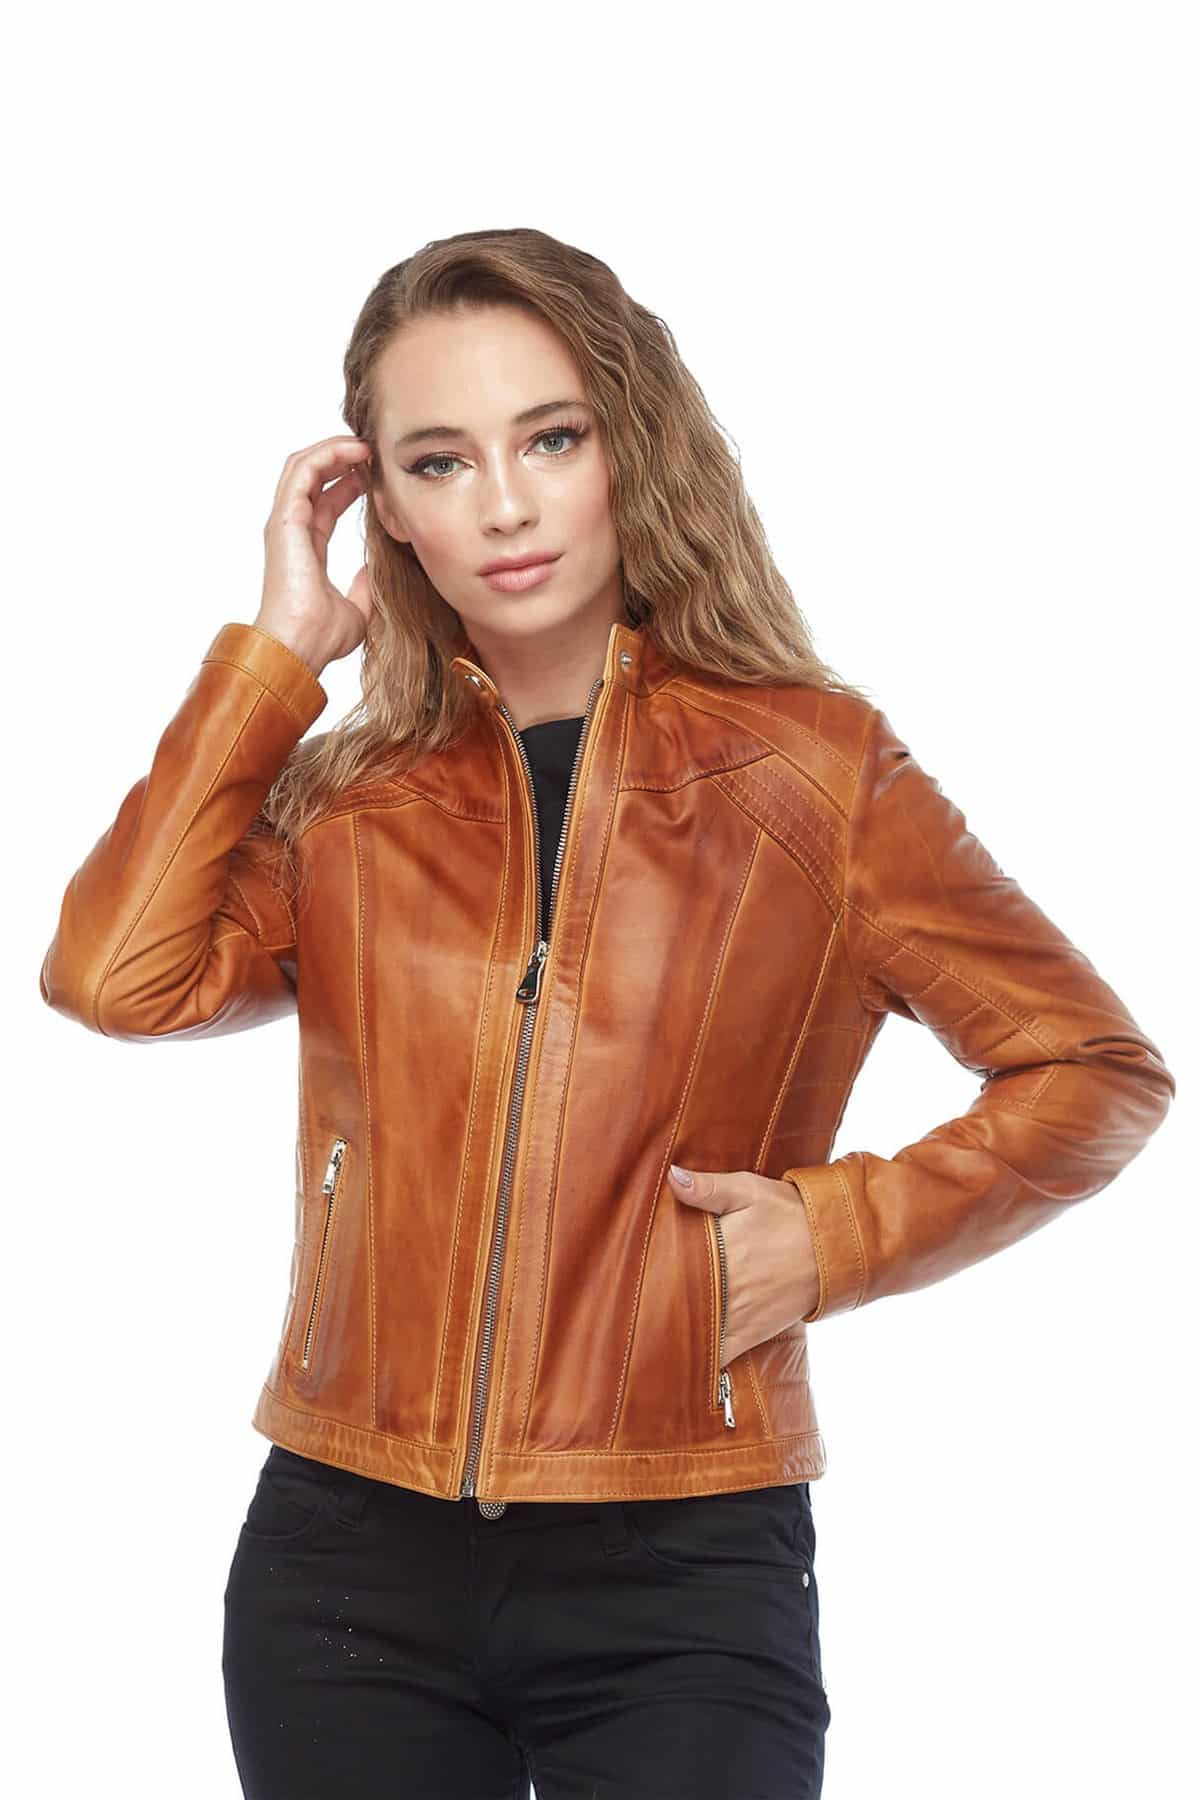 Millie Brady Waxed Brown Leather Jacket Pase